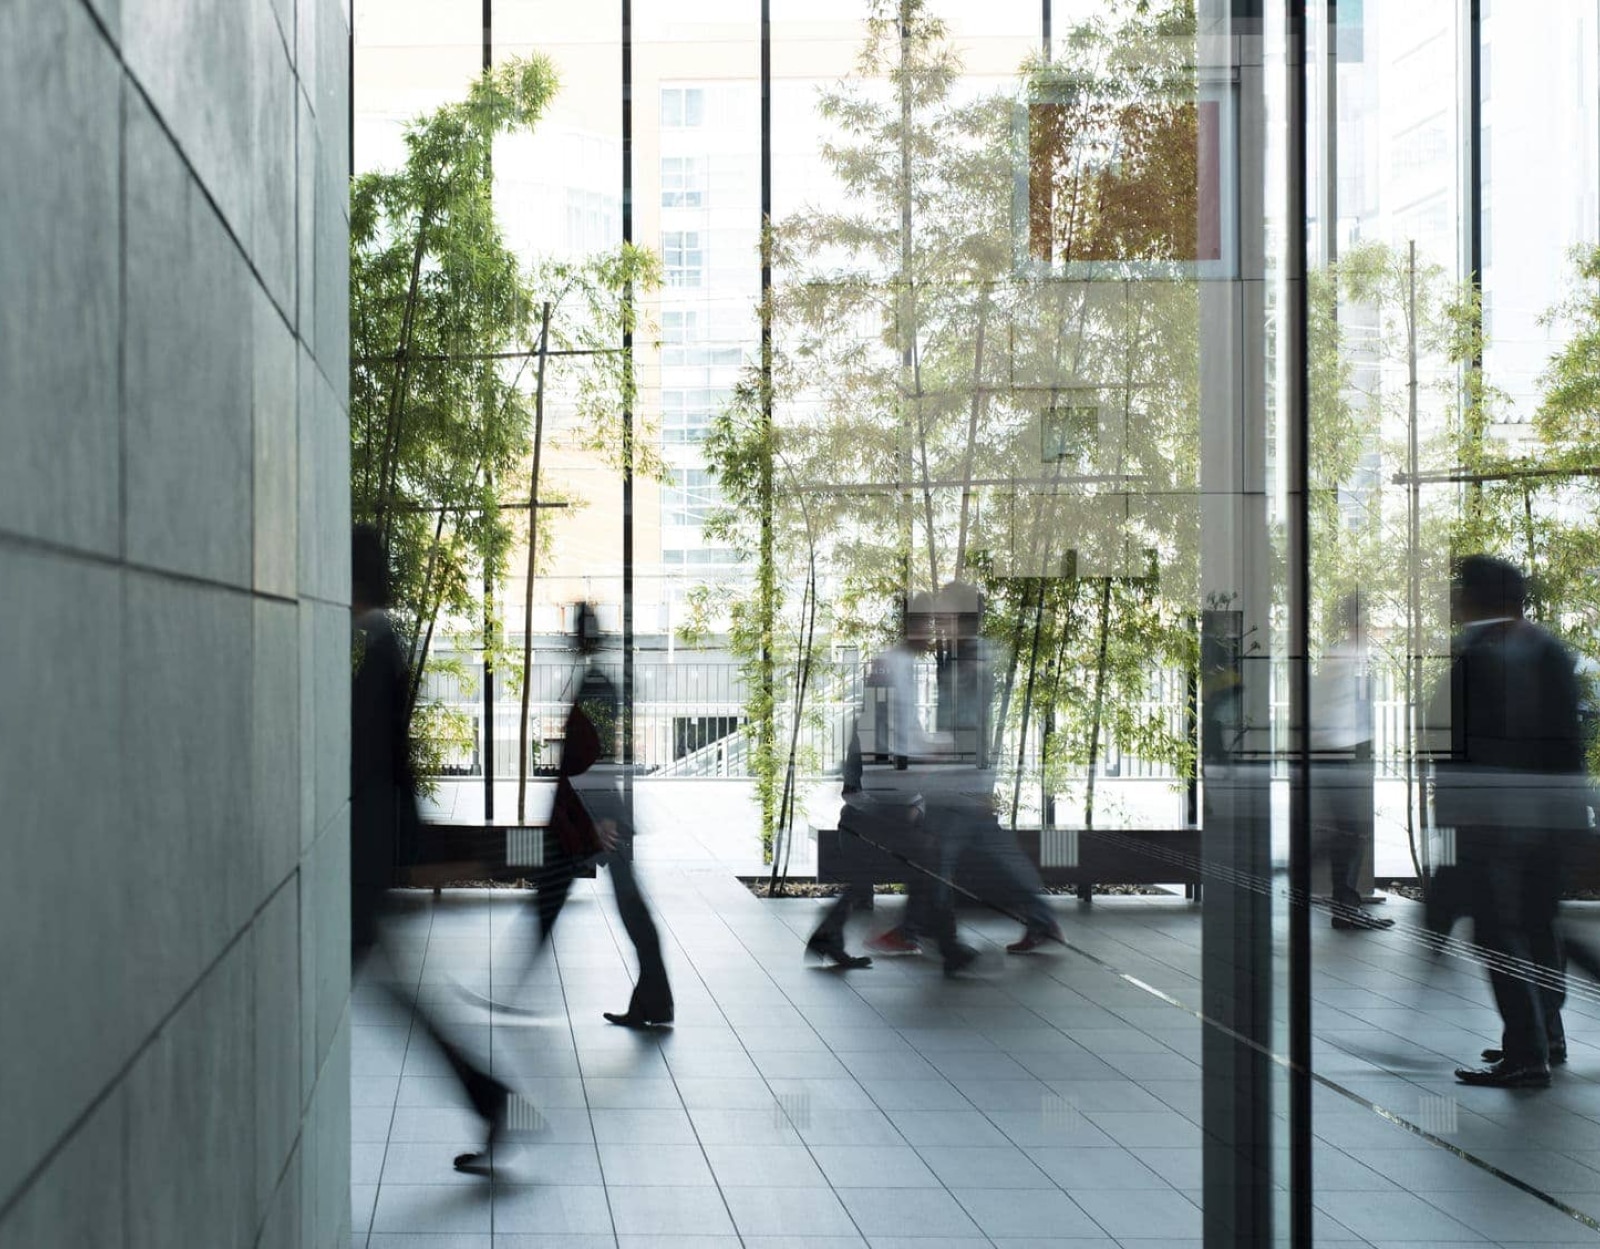 People walking in an atrium of an office building, surrounded by trees